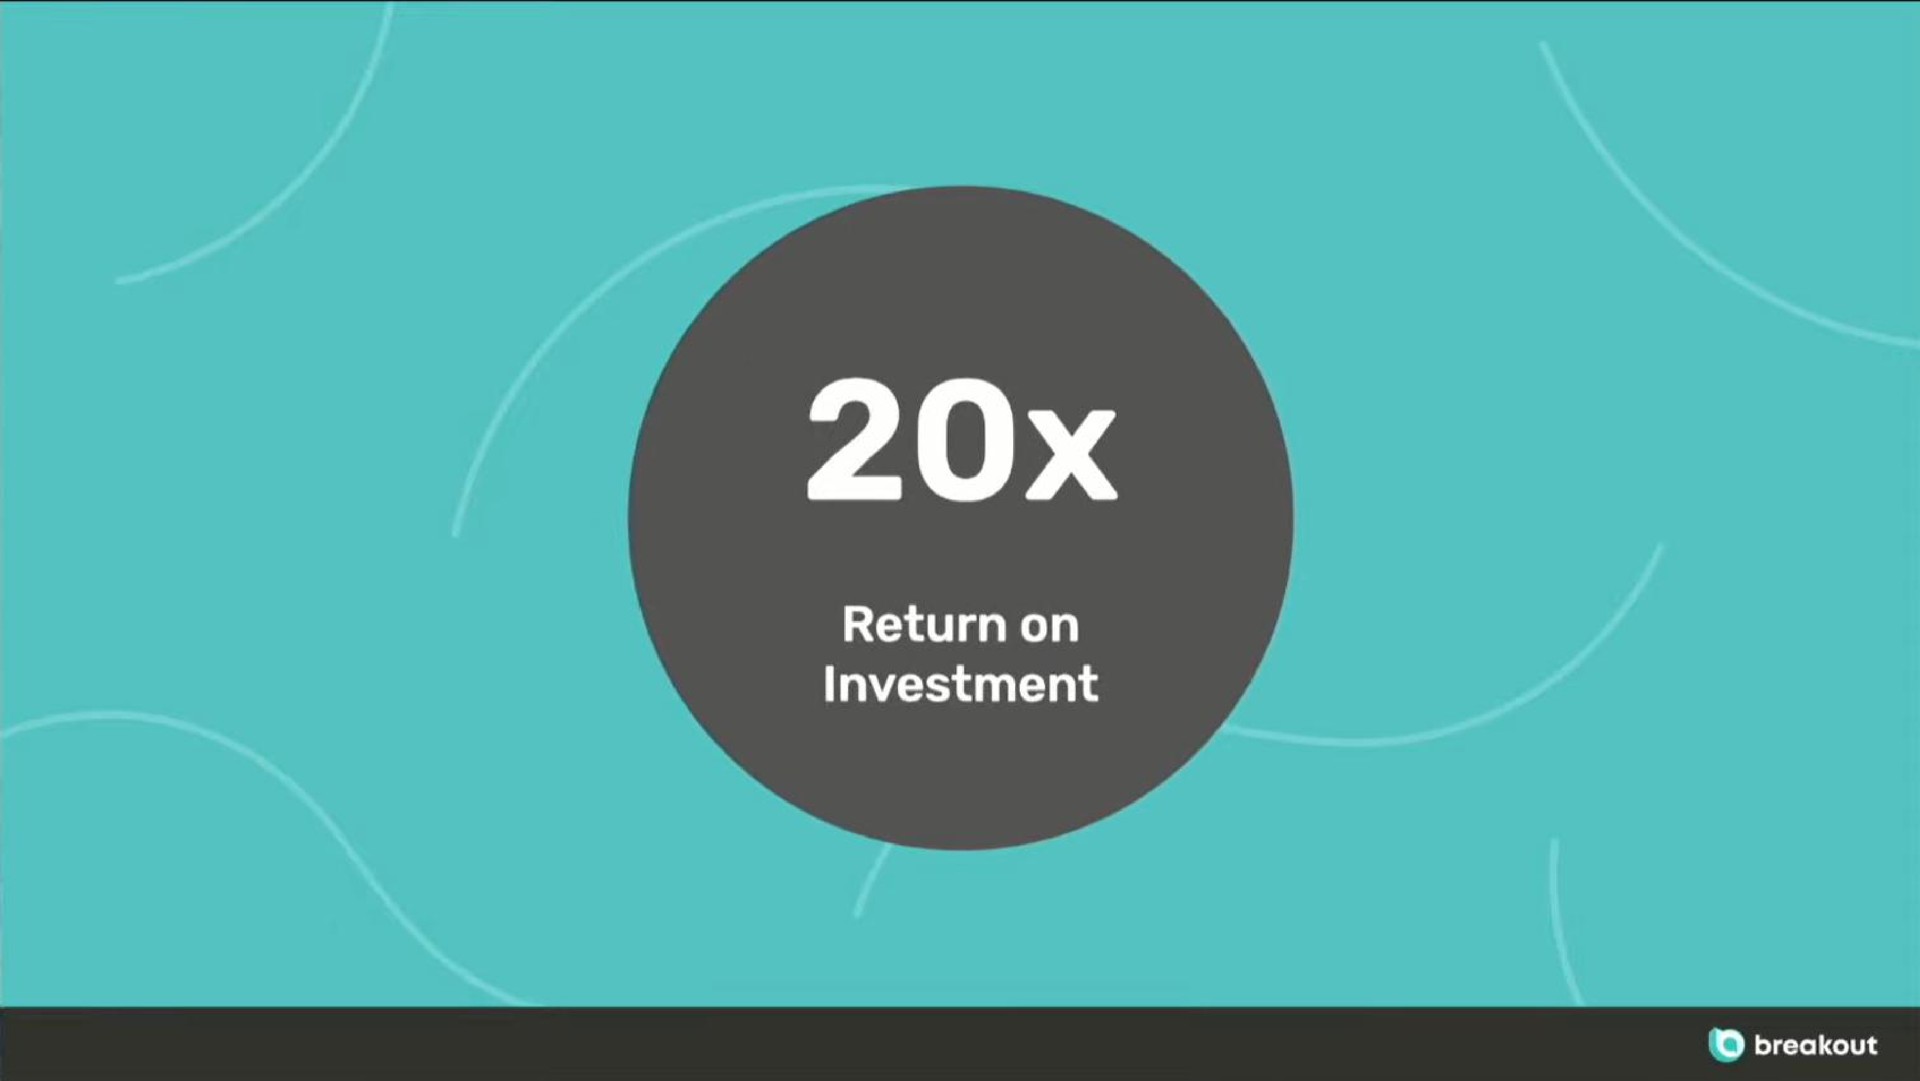 return on investment | Breakout